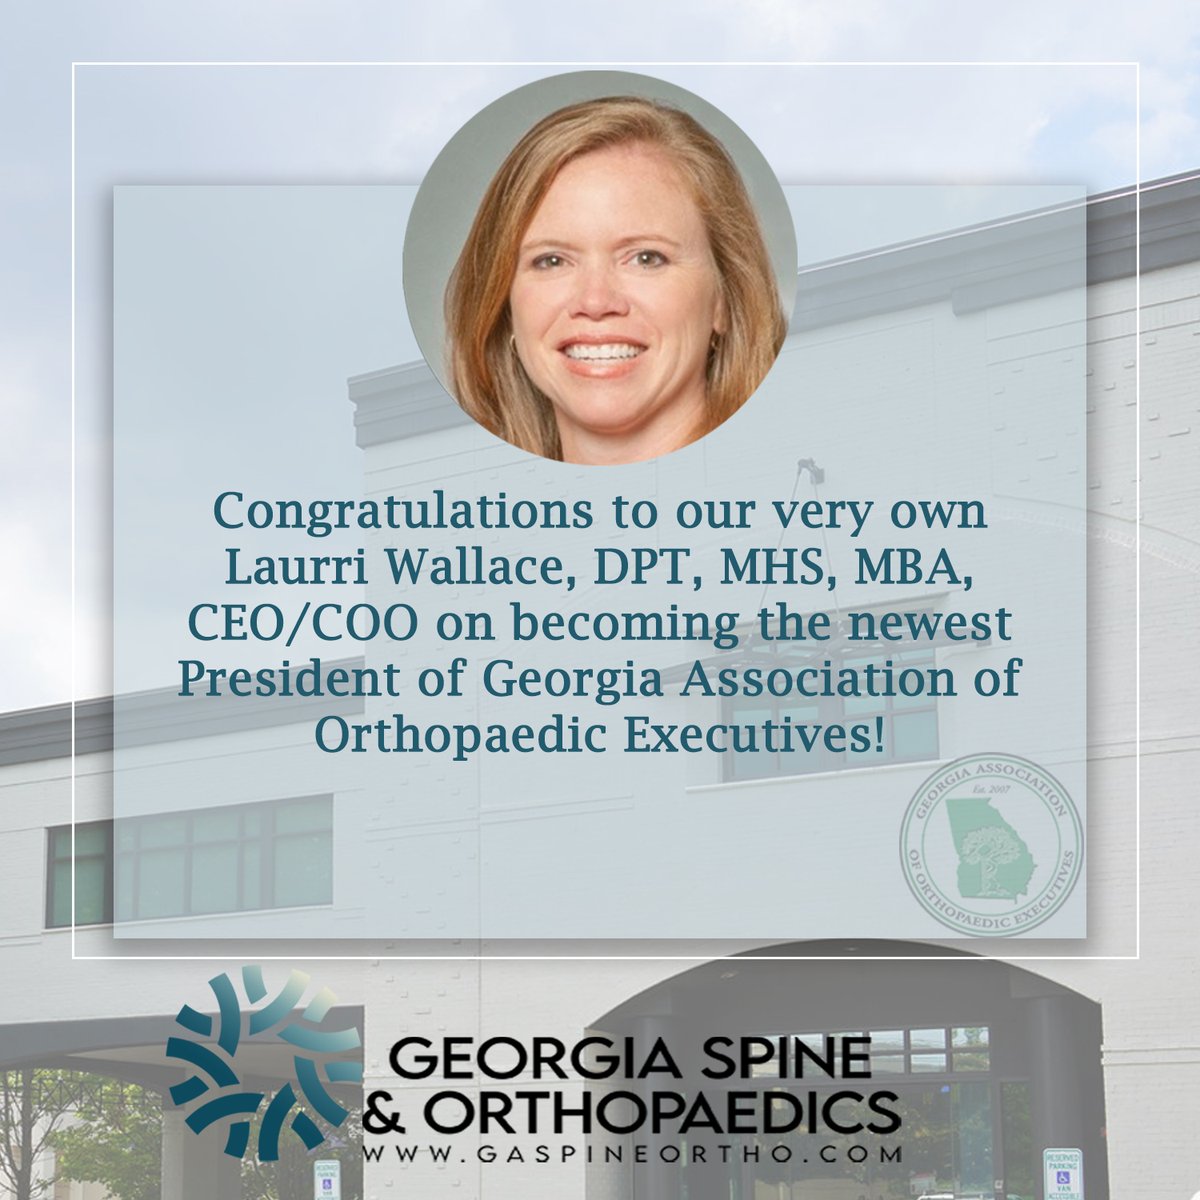 RT @gaspineortho1: Congratulations to our very own Laurri Wallace, DPT, MHS, MBA, CMPE, CEO/COO-Georgia Association of Orthopaedic Executives newest President!!!  Way to Go Laurri, thank You for always Leading the way! #GSO #GSOLeadership #GAOE